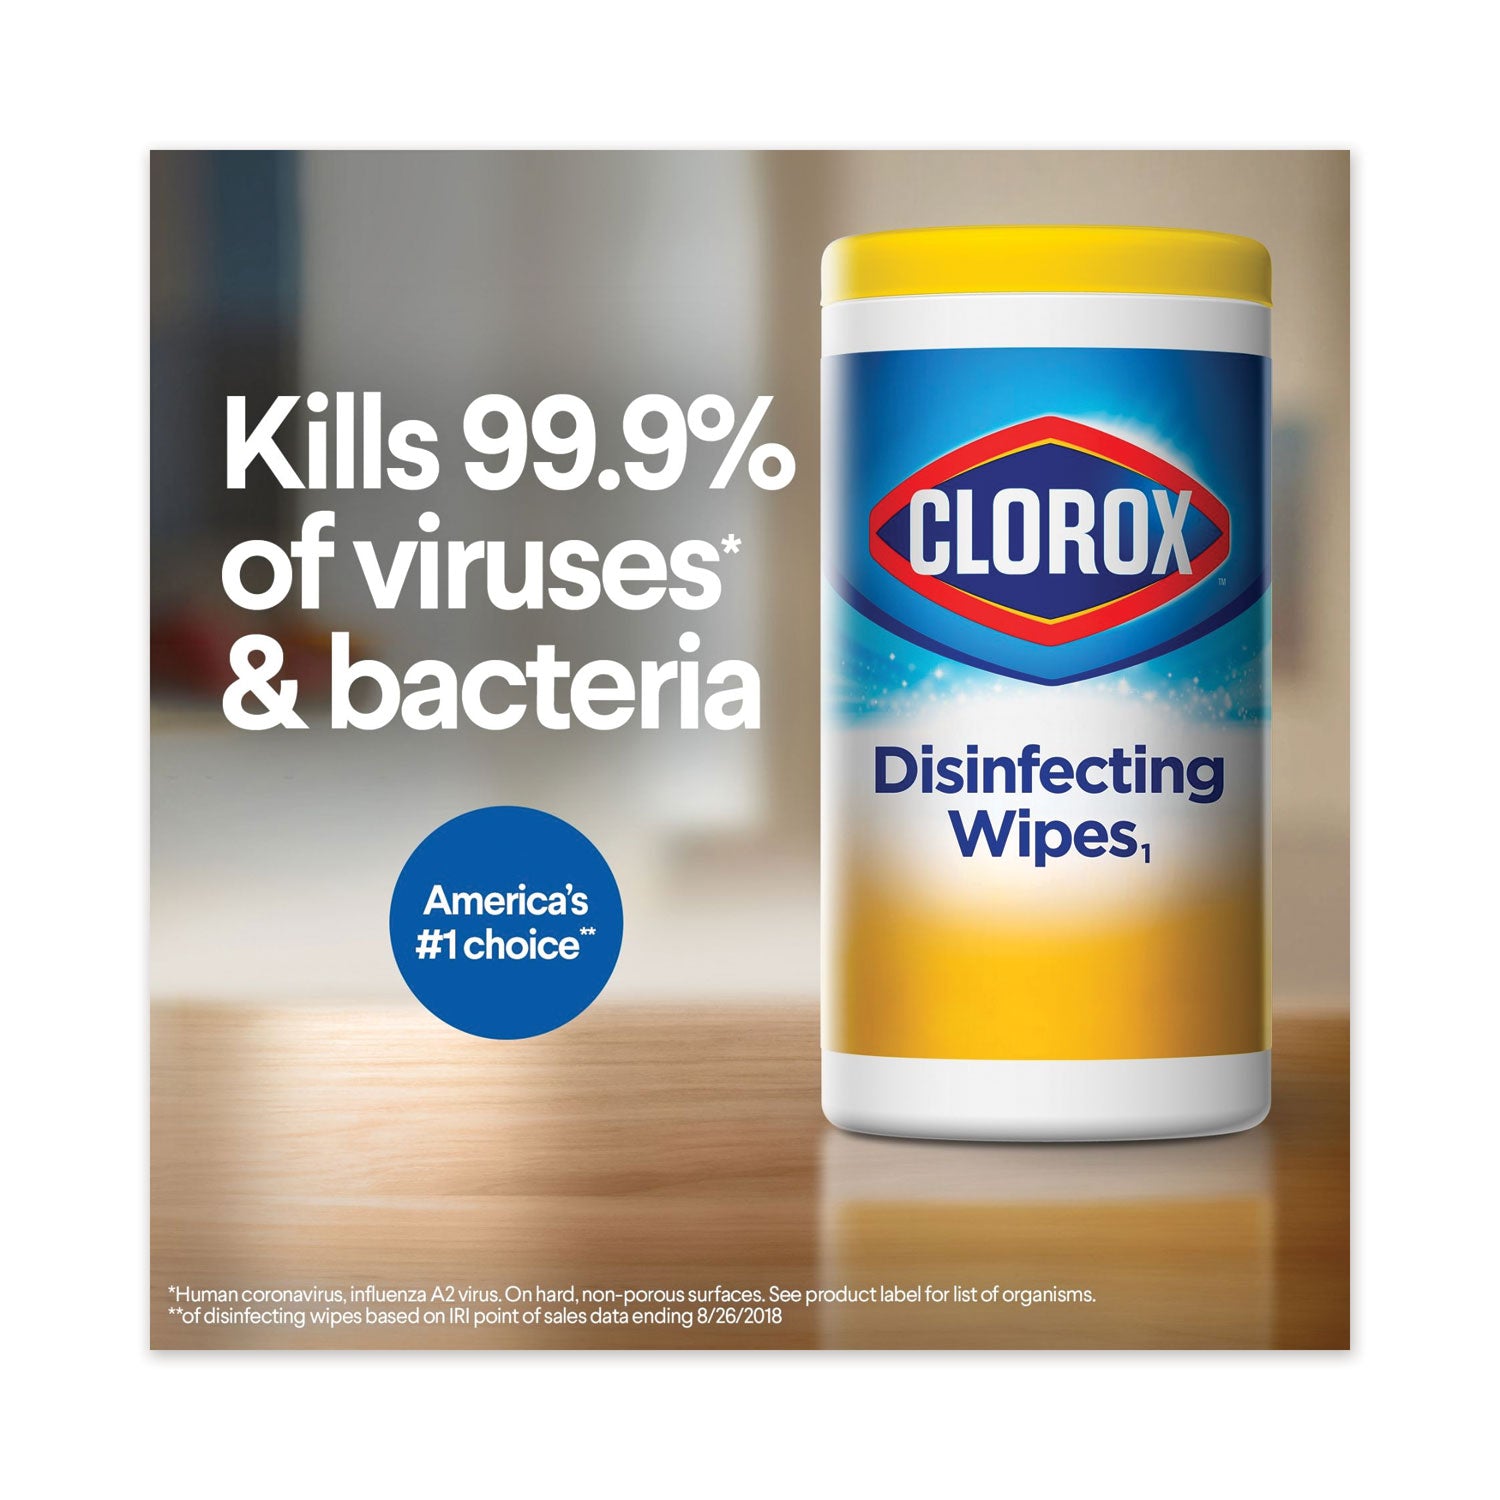 disinfecting-wipes-1-ply-7-x-8-fresh-scent-citrus-blend-white-75-canister-3-pack-4-packs-carton_clo30208 - 5